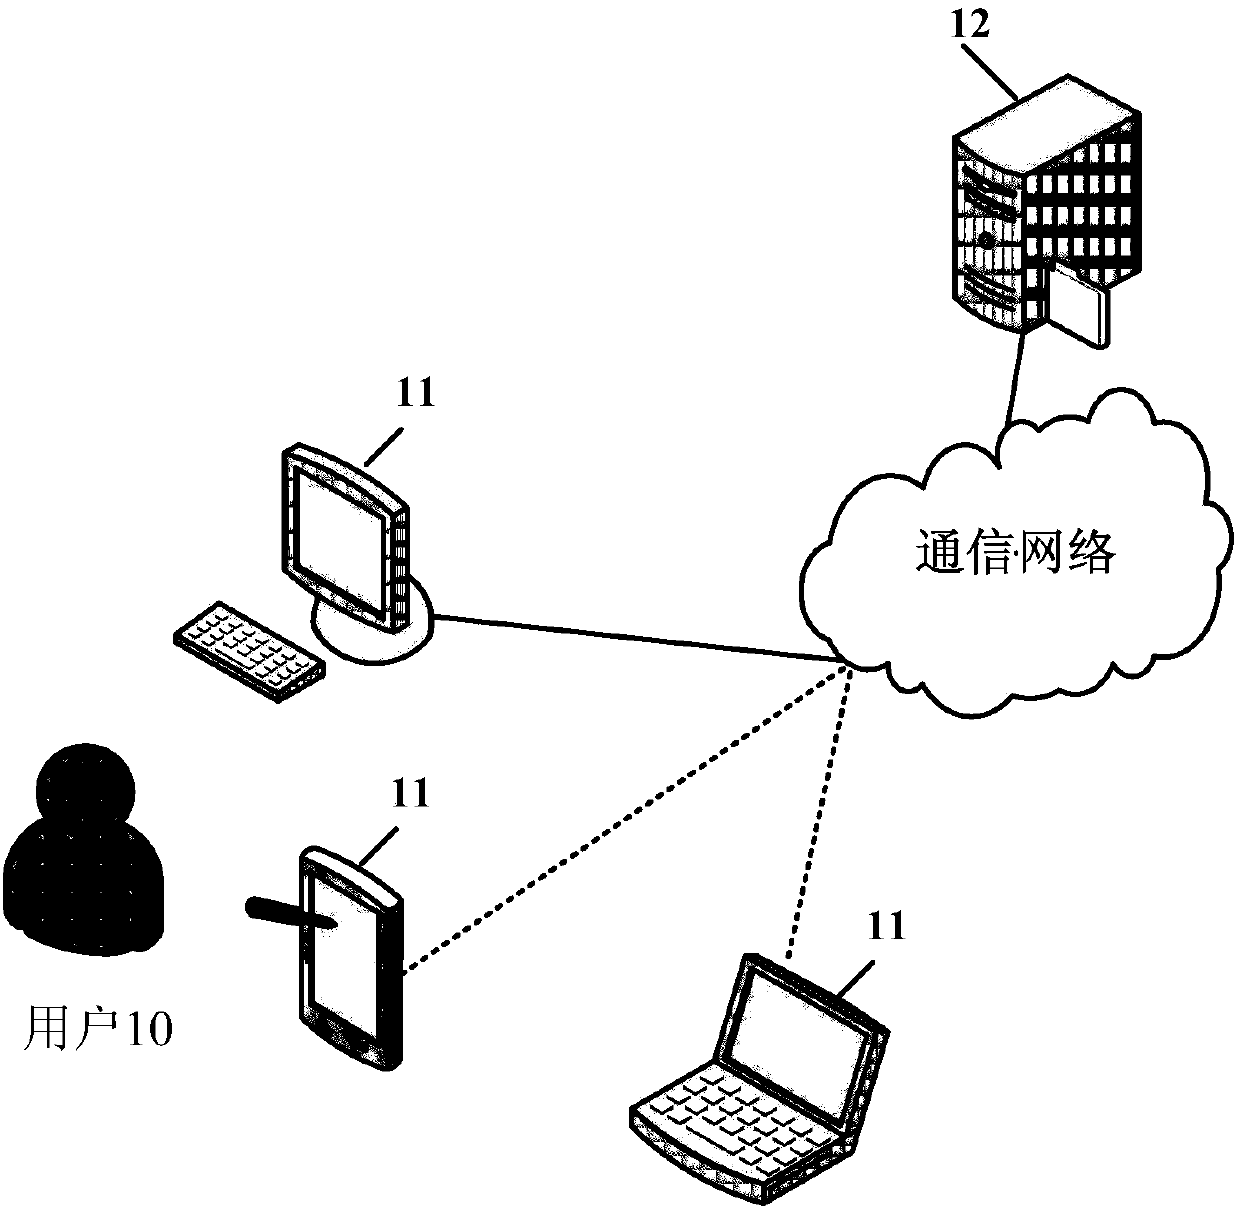 Network questionnaire generation method and device